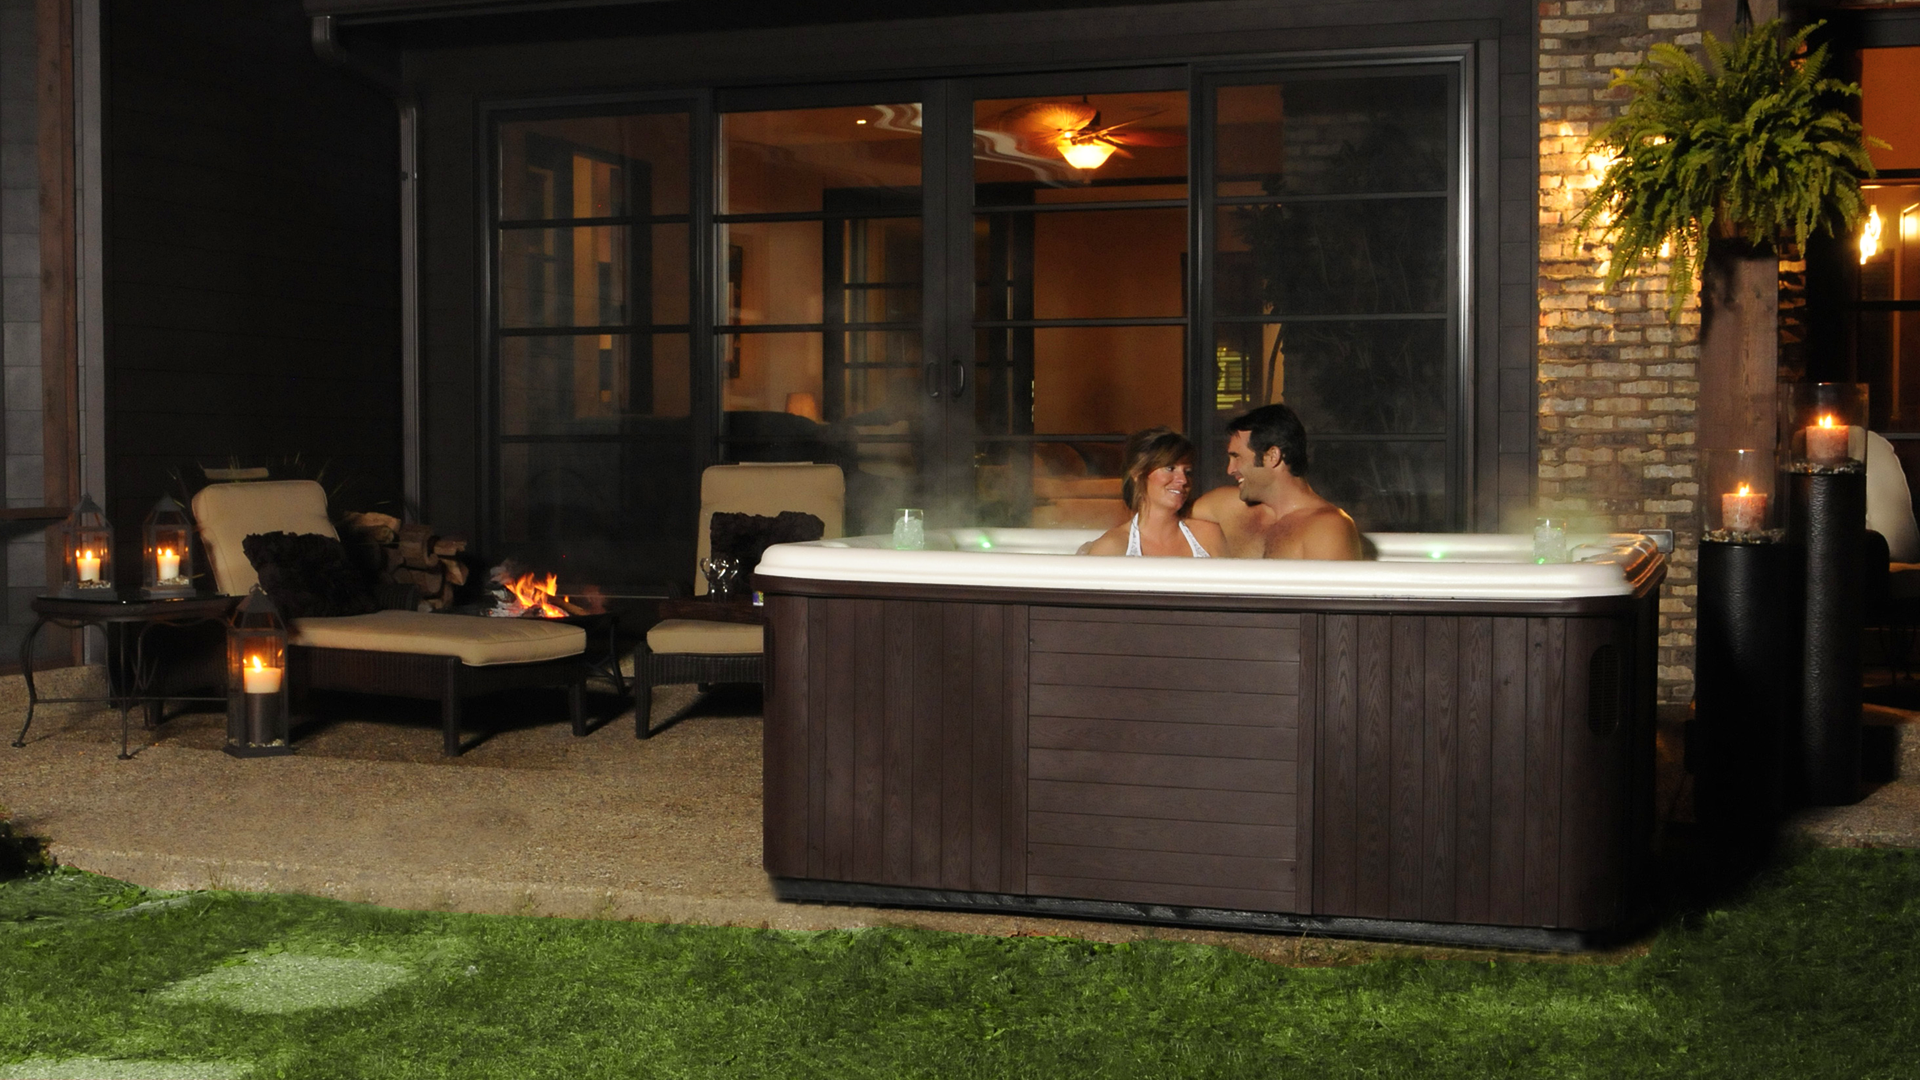 How to Use Your Hot Tub in Summer